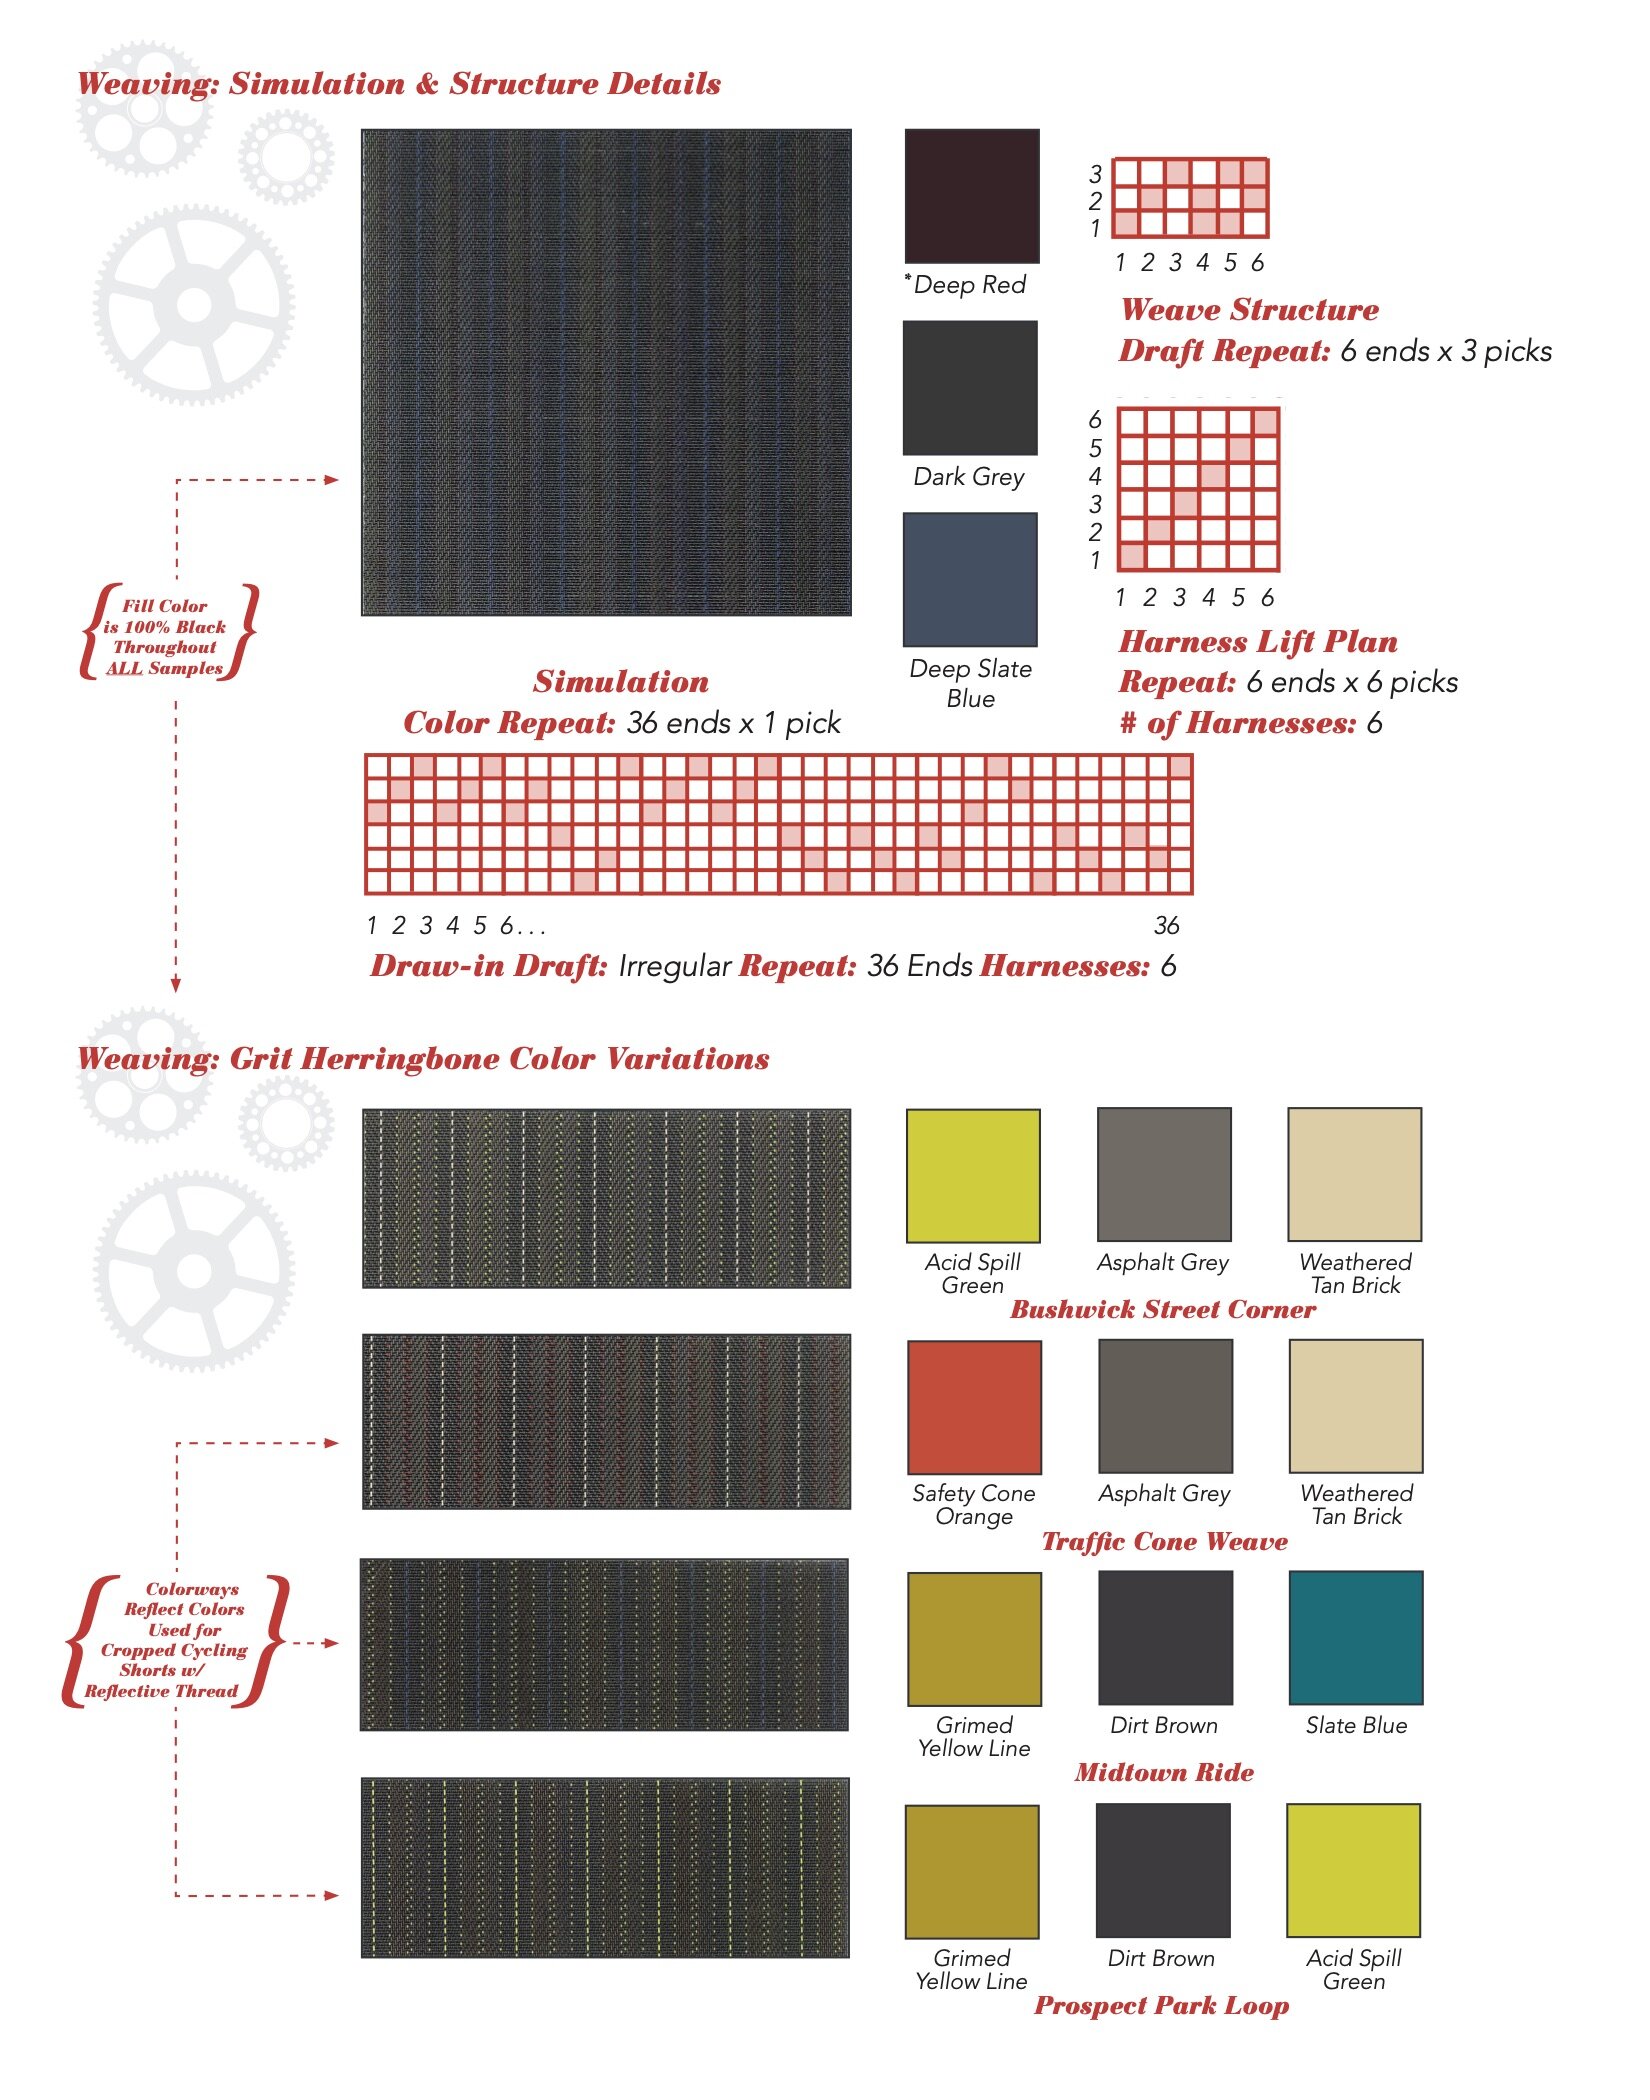 Analysis & Spec of Woven Fabric